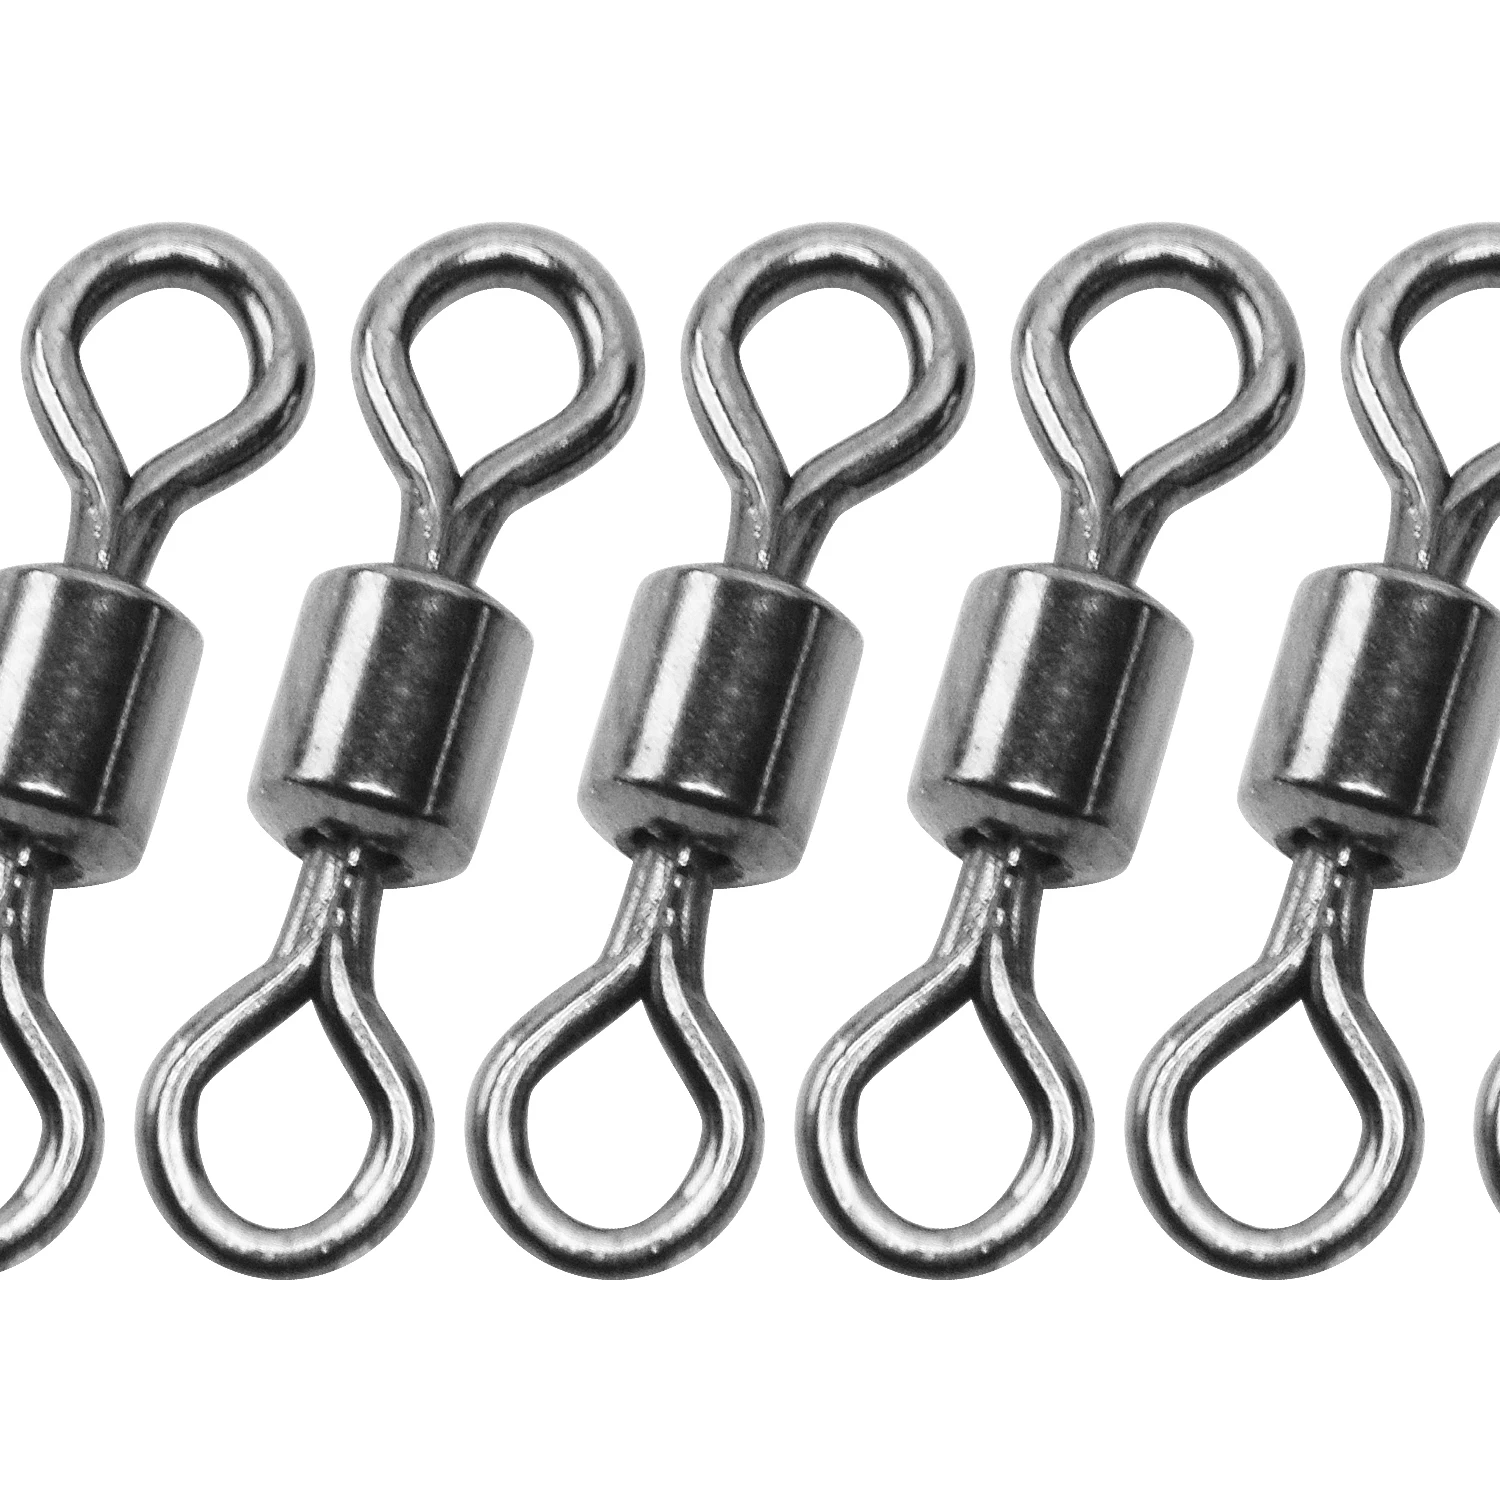 https://ae01.alicdn.com/kf/H0bf3decaf0424071973dbe3d7296add0m/SF-25PCS-Fly-Fishing-Micro-Swivels-Stainless-Steel-Ball-Bearing-Swivels-Hook-line-Connector-Fishing-Tackle.jpg